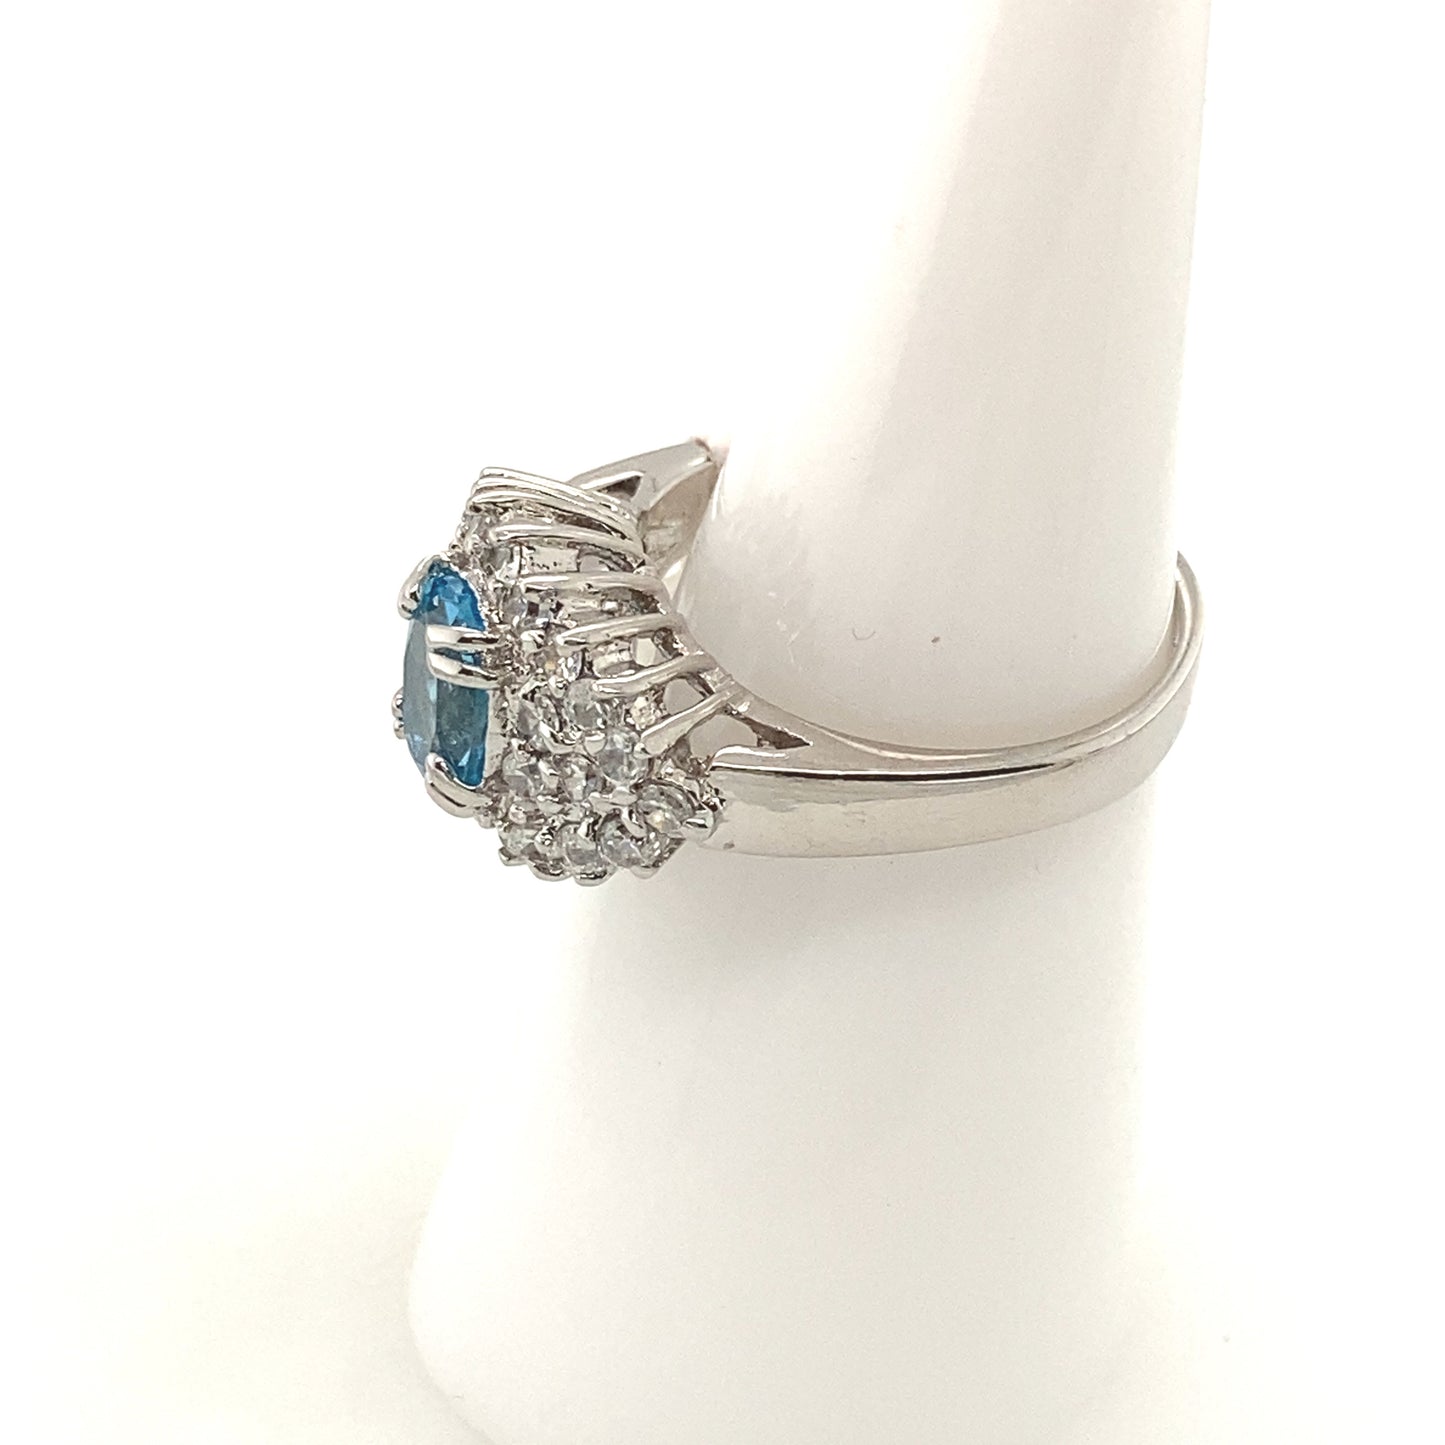 Sterling Silver 925 Rhodium plated Ring with blue topaz color crystal stone.